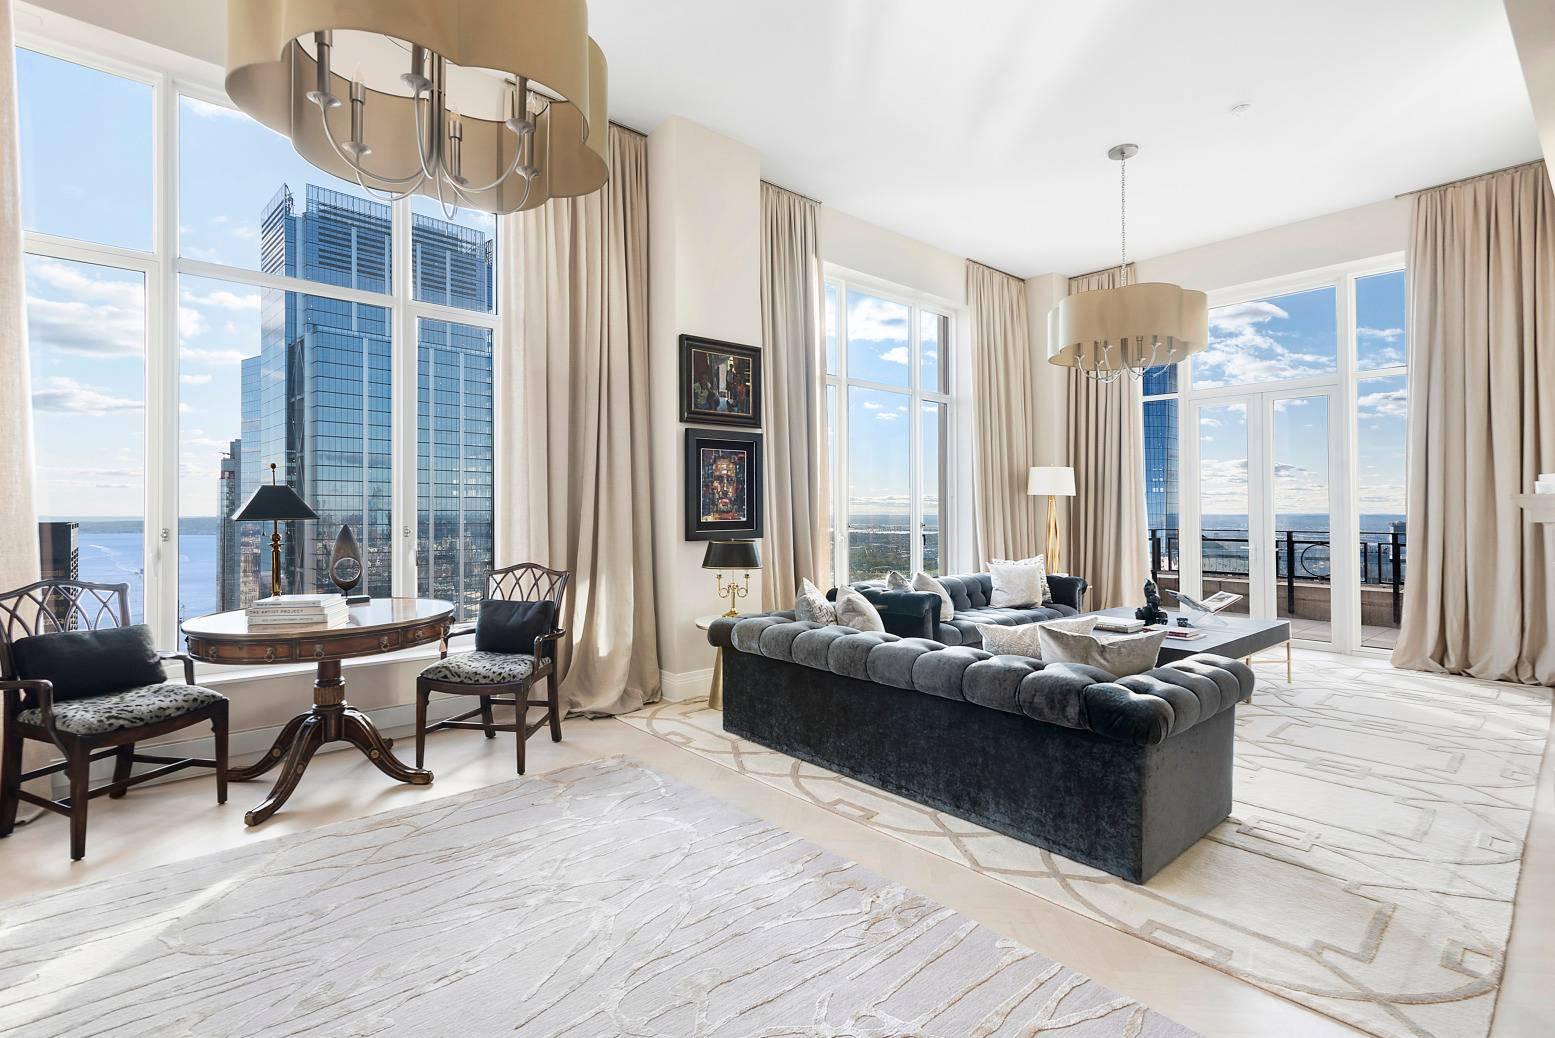 The Four Seasons residences at 30 Park Place are exceptional, but Penthouse 75B is extraordinary.